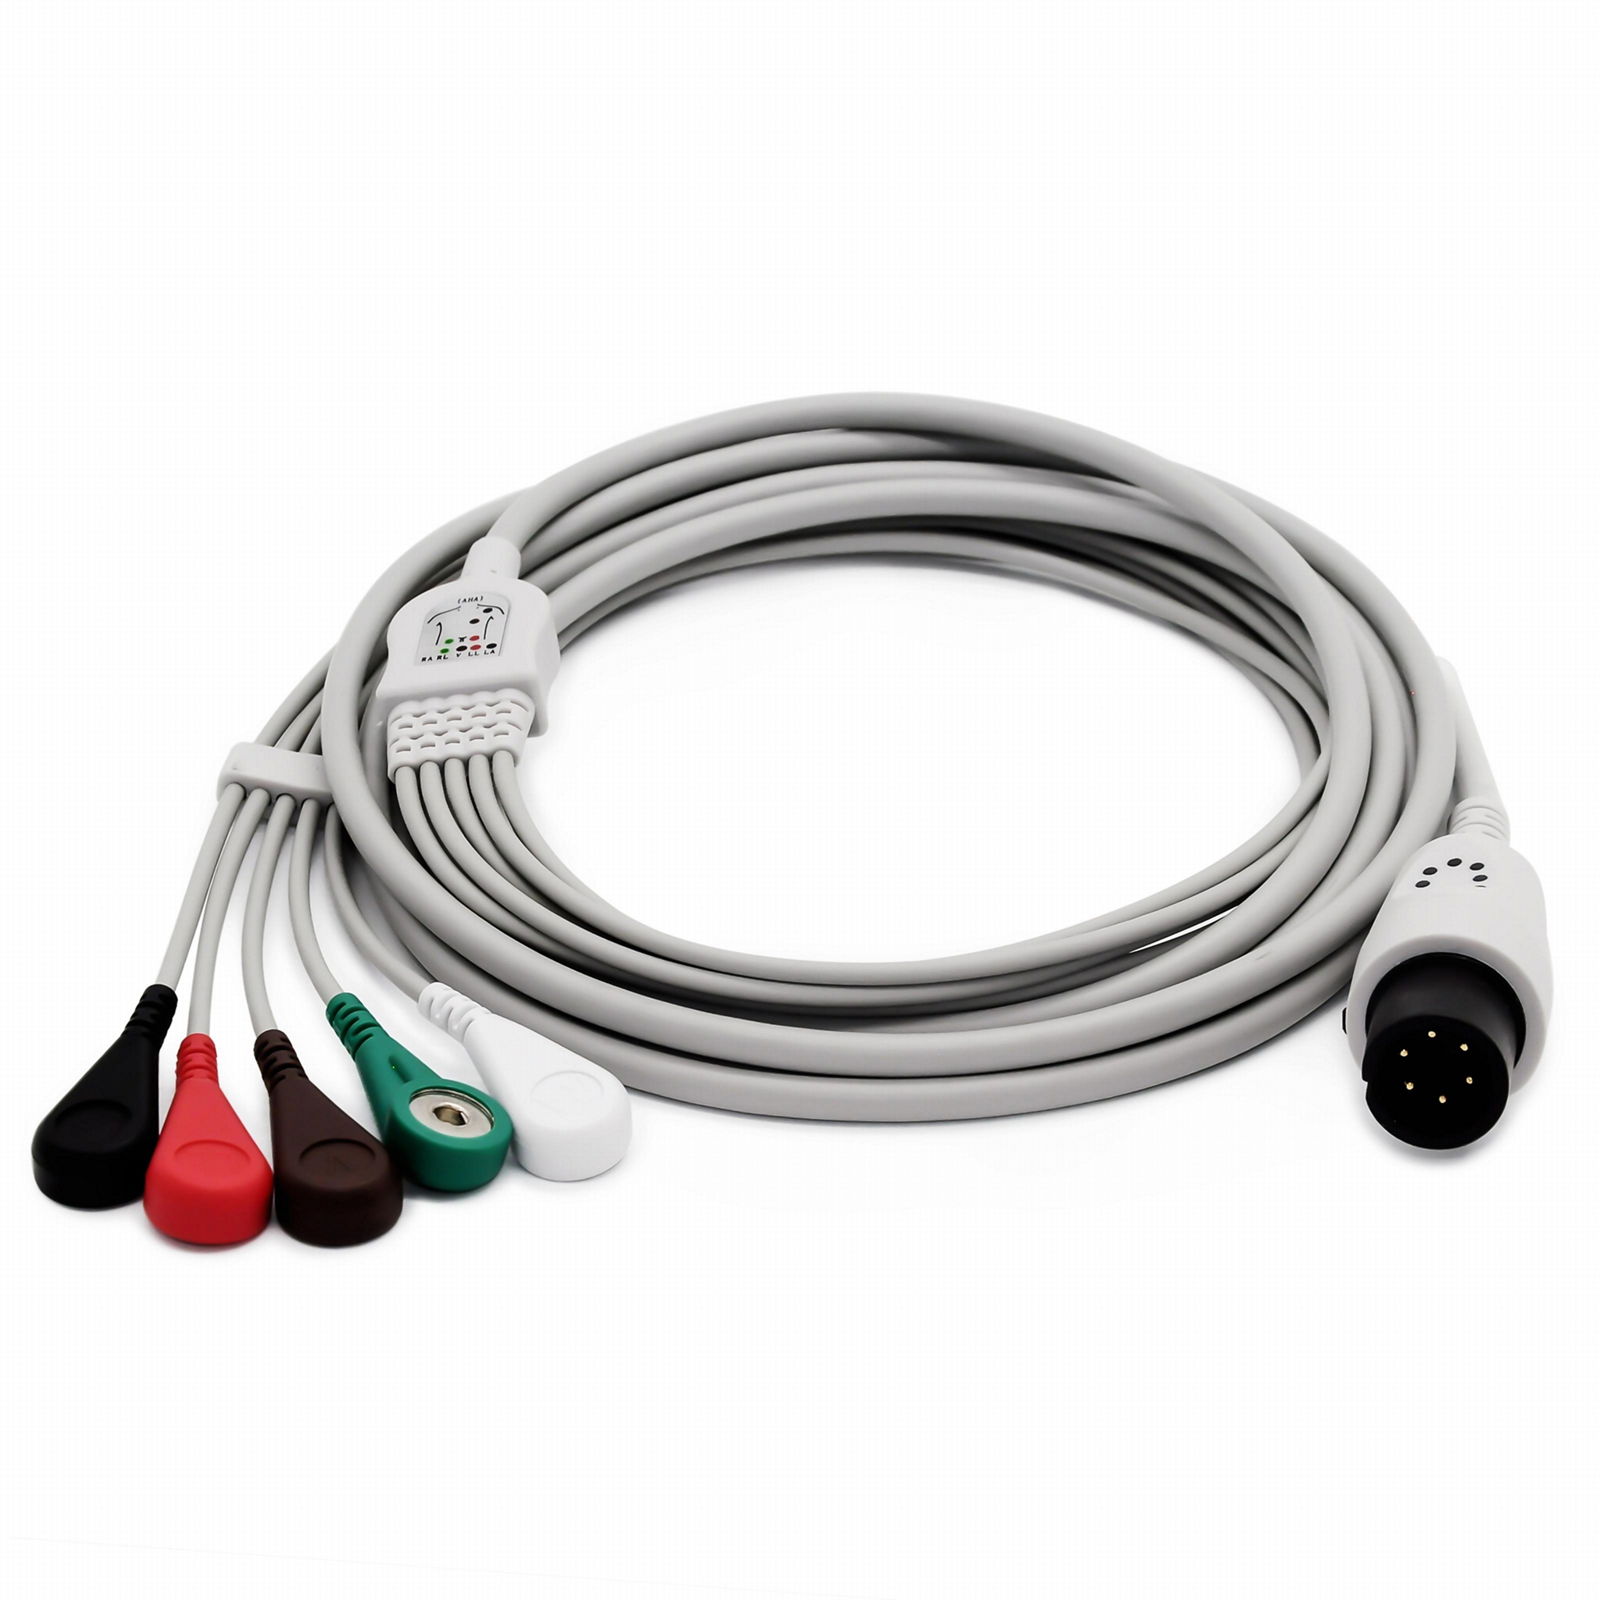 GE Pro1000 5-lead ECG Cable with leadwires